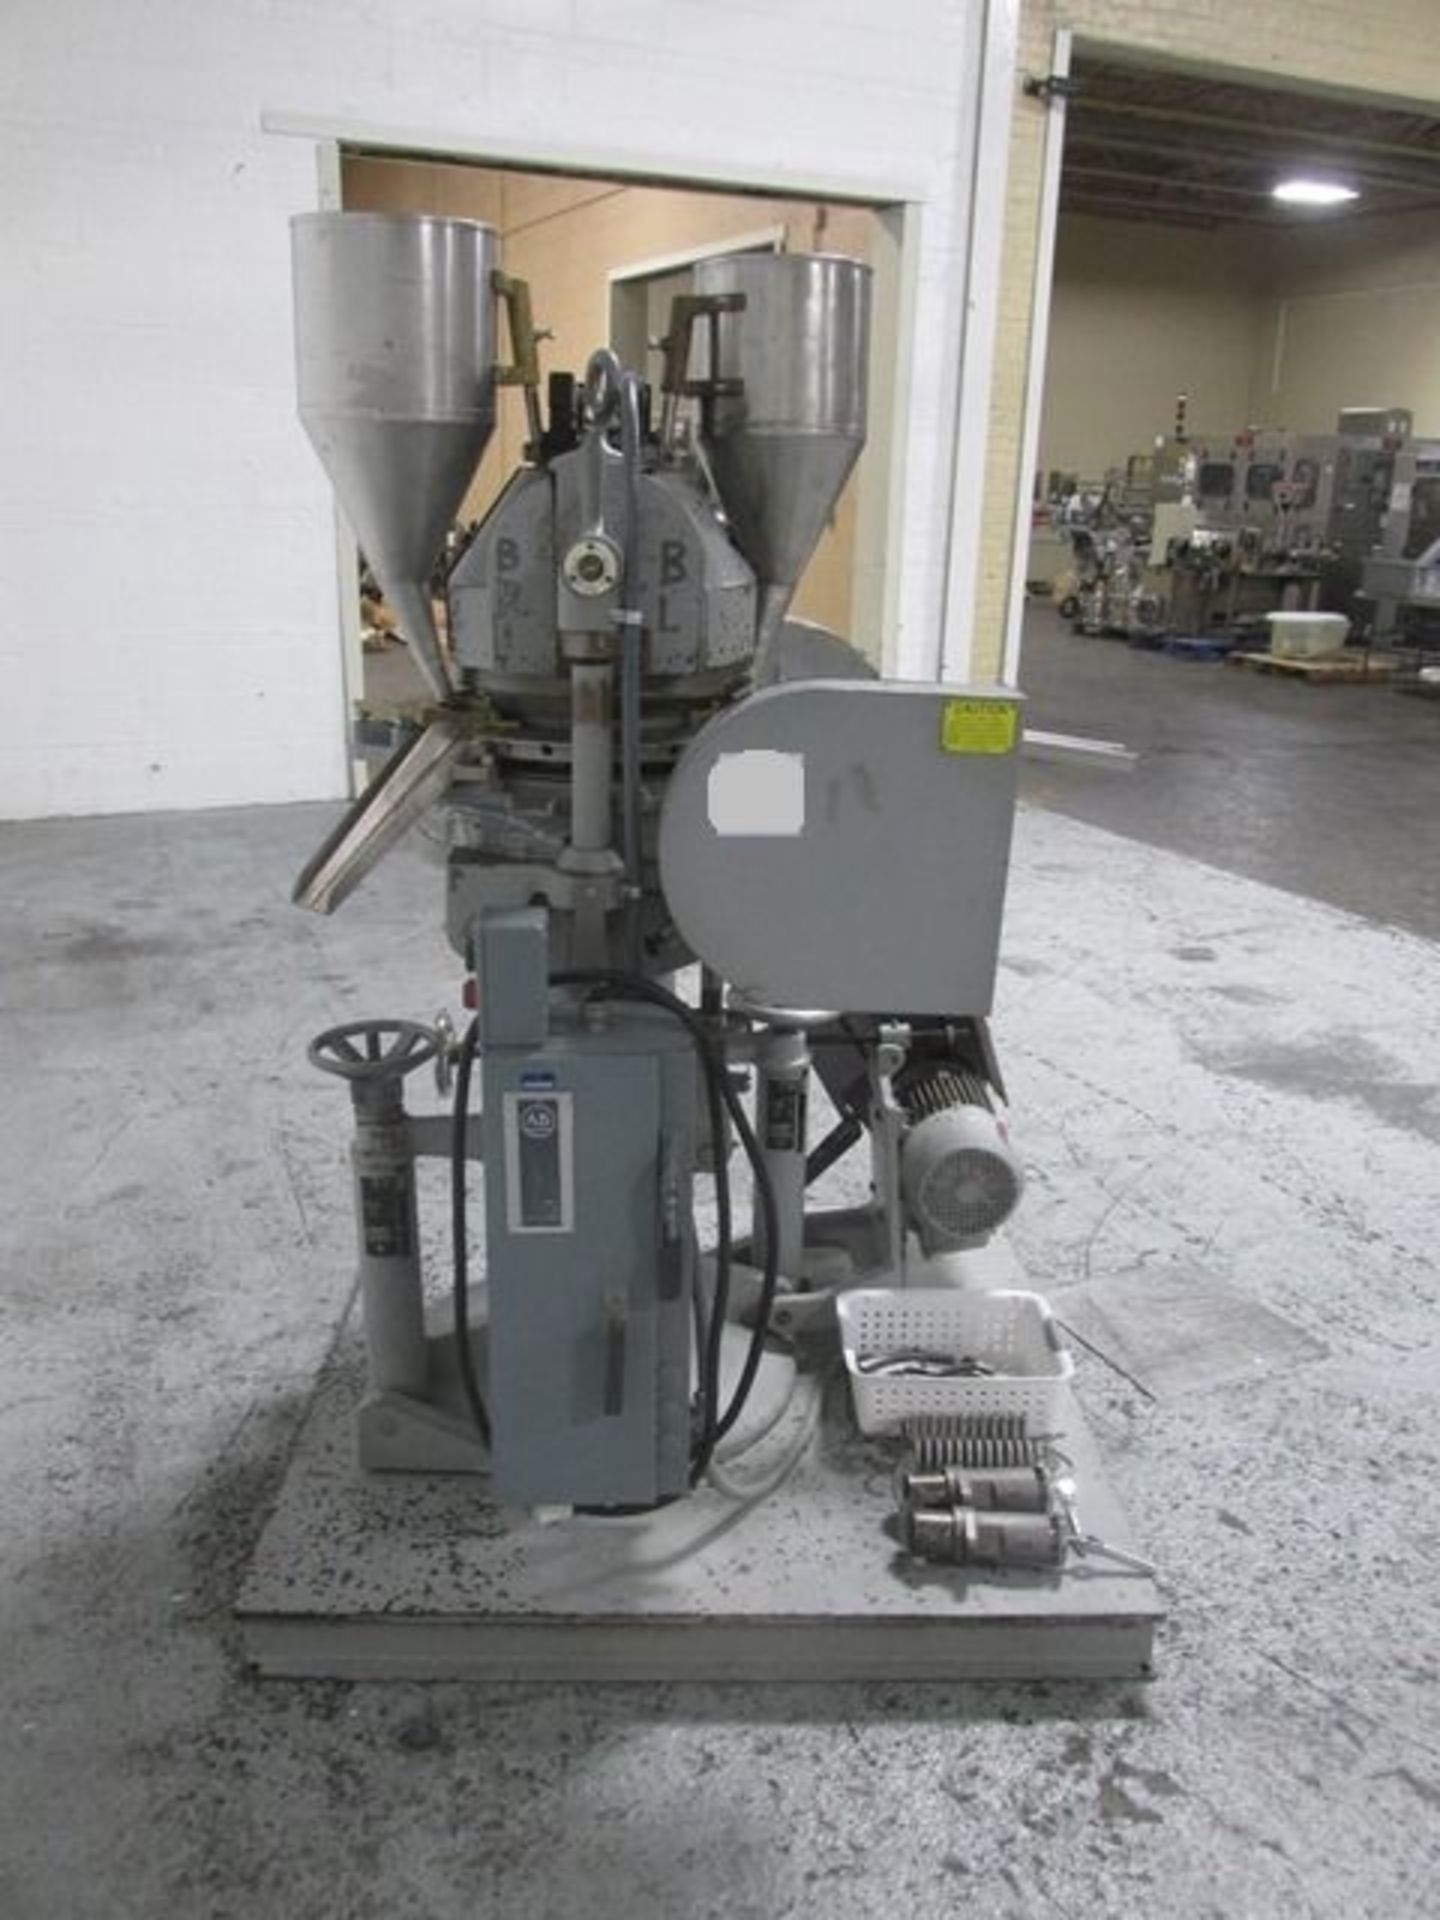 Stokes rotary tablet press. model 900-513-2, 27 station, double sided, keyed upper punch guides, - Image 2 of 16